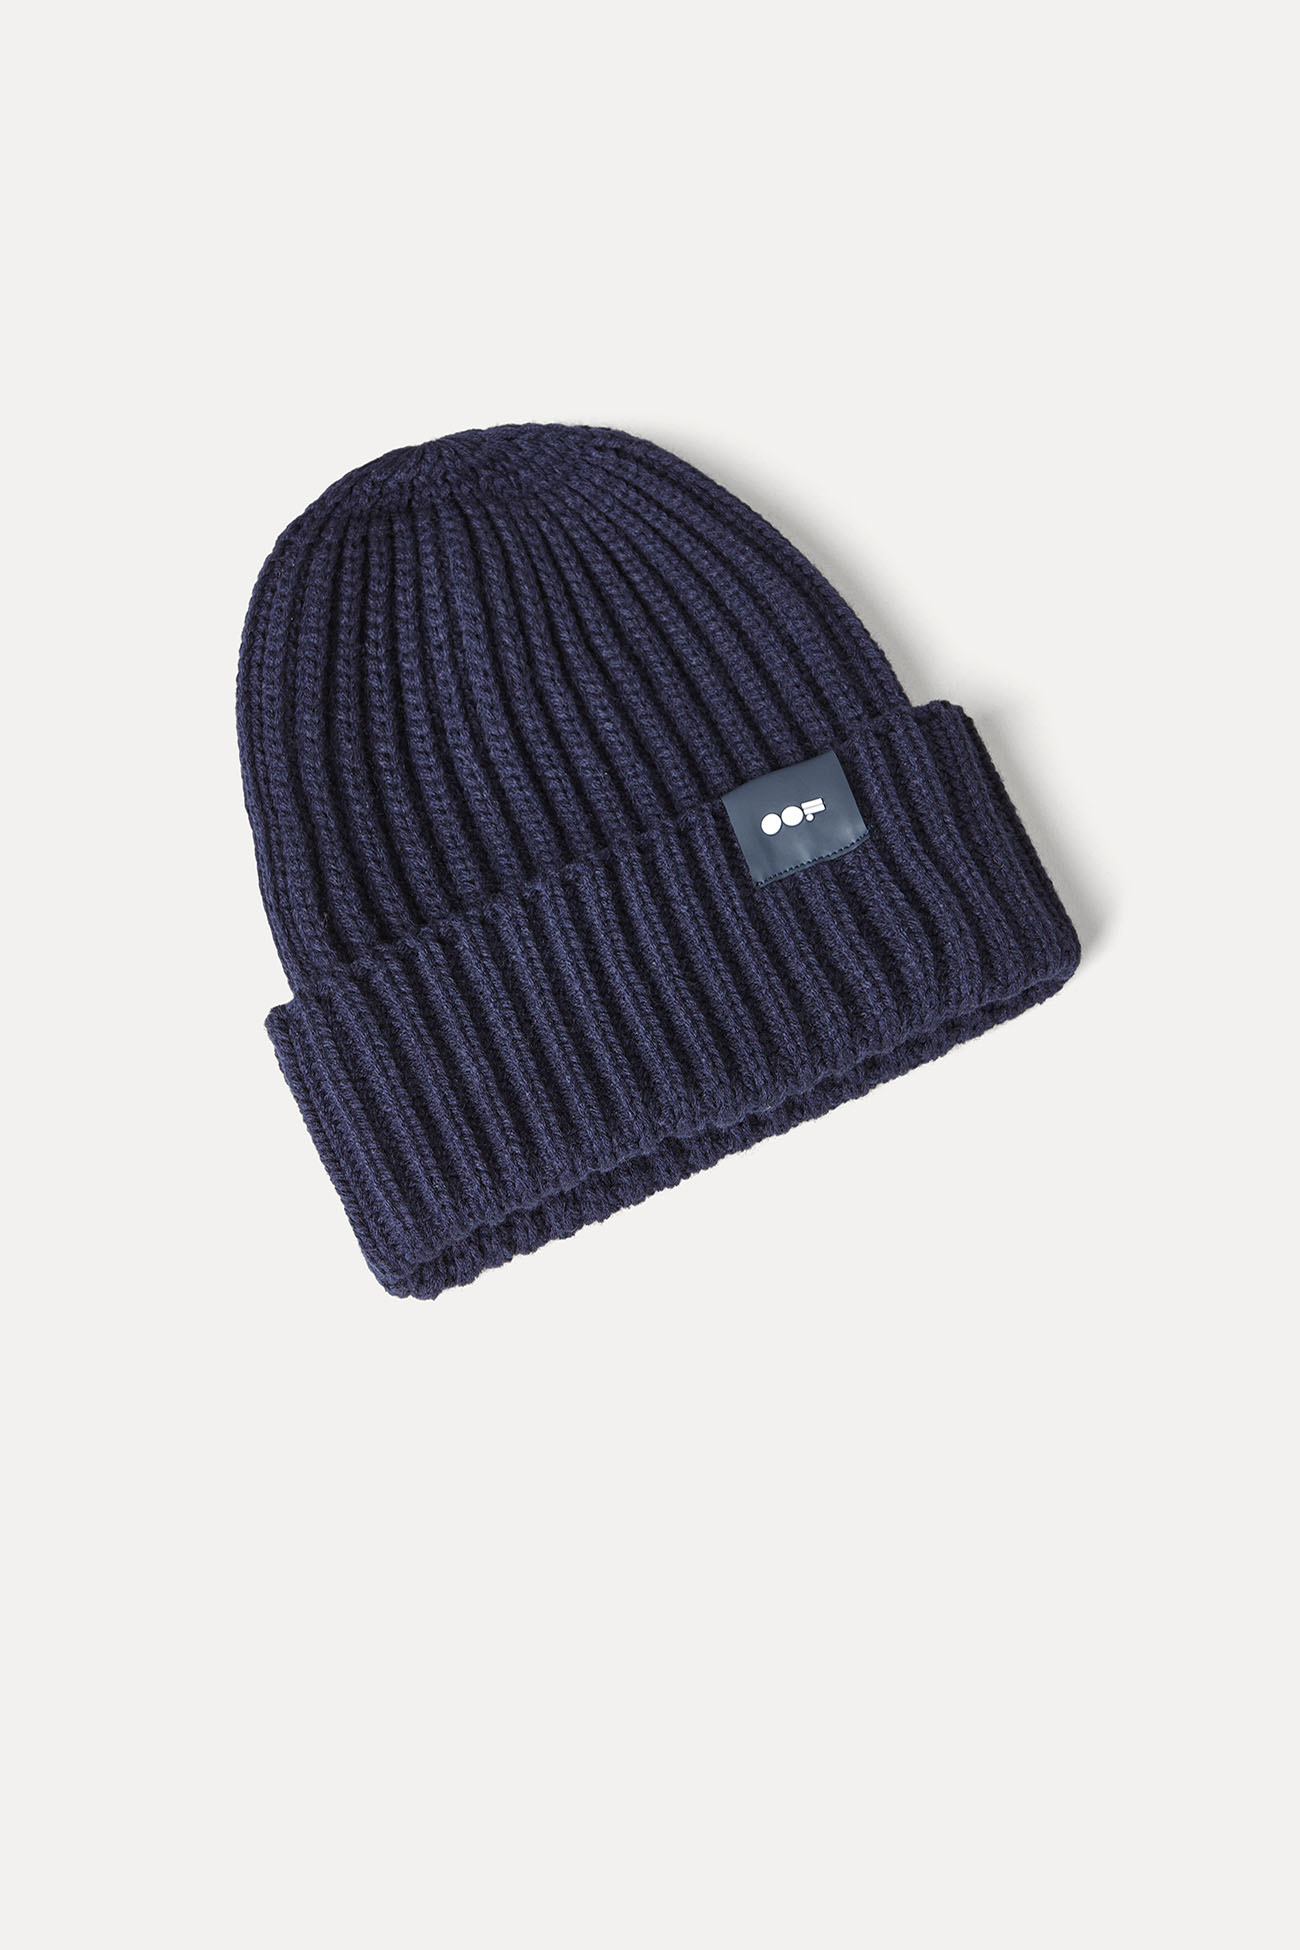 HAT 3013 MADE IN KNITTED WOOL - NAVY BLUE - OOF WEAR